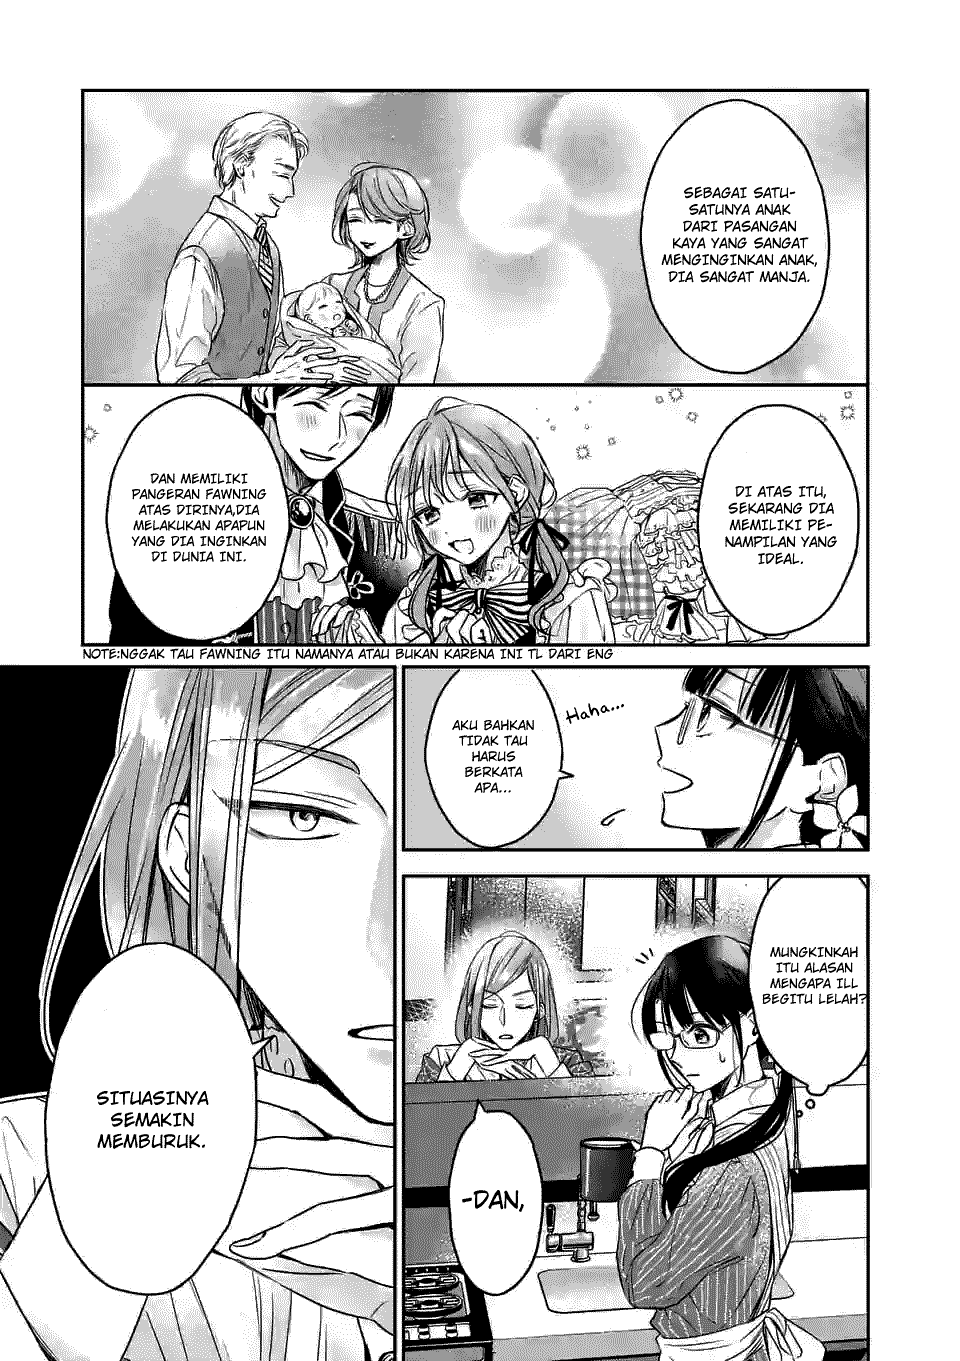 The Savior’s Book Café in Another World Chapter 6